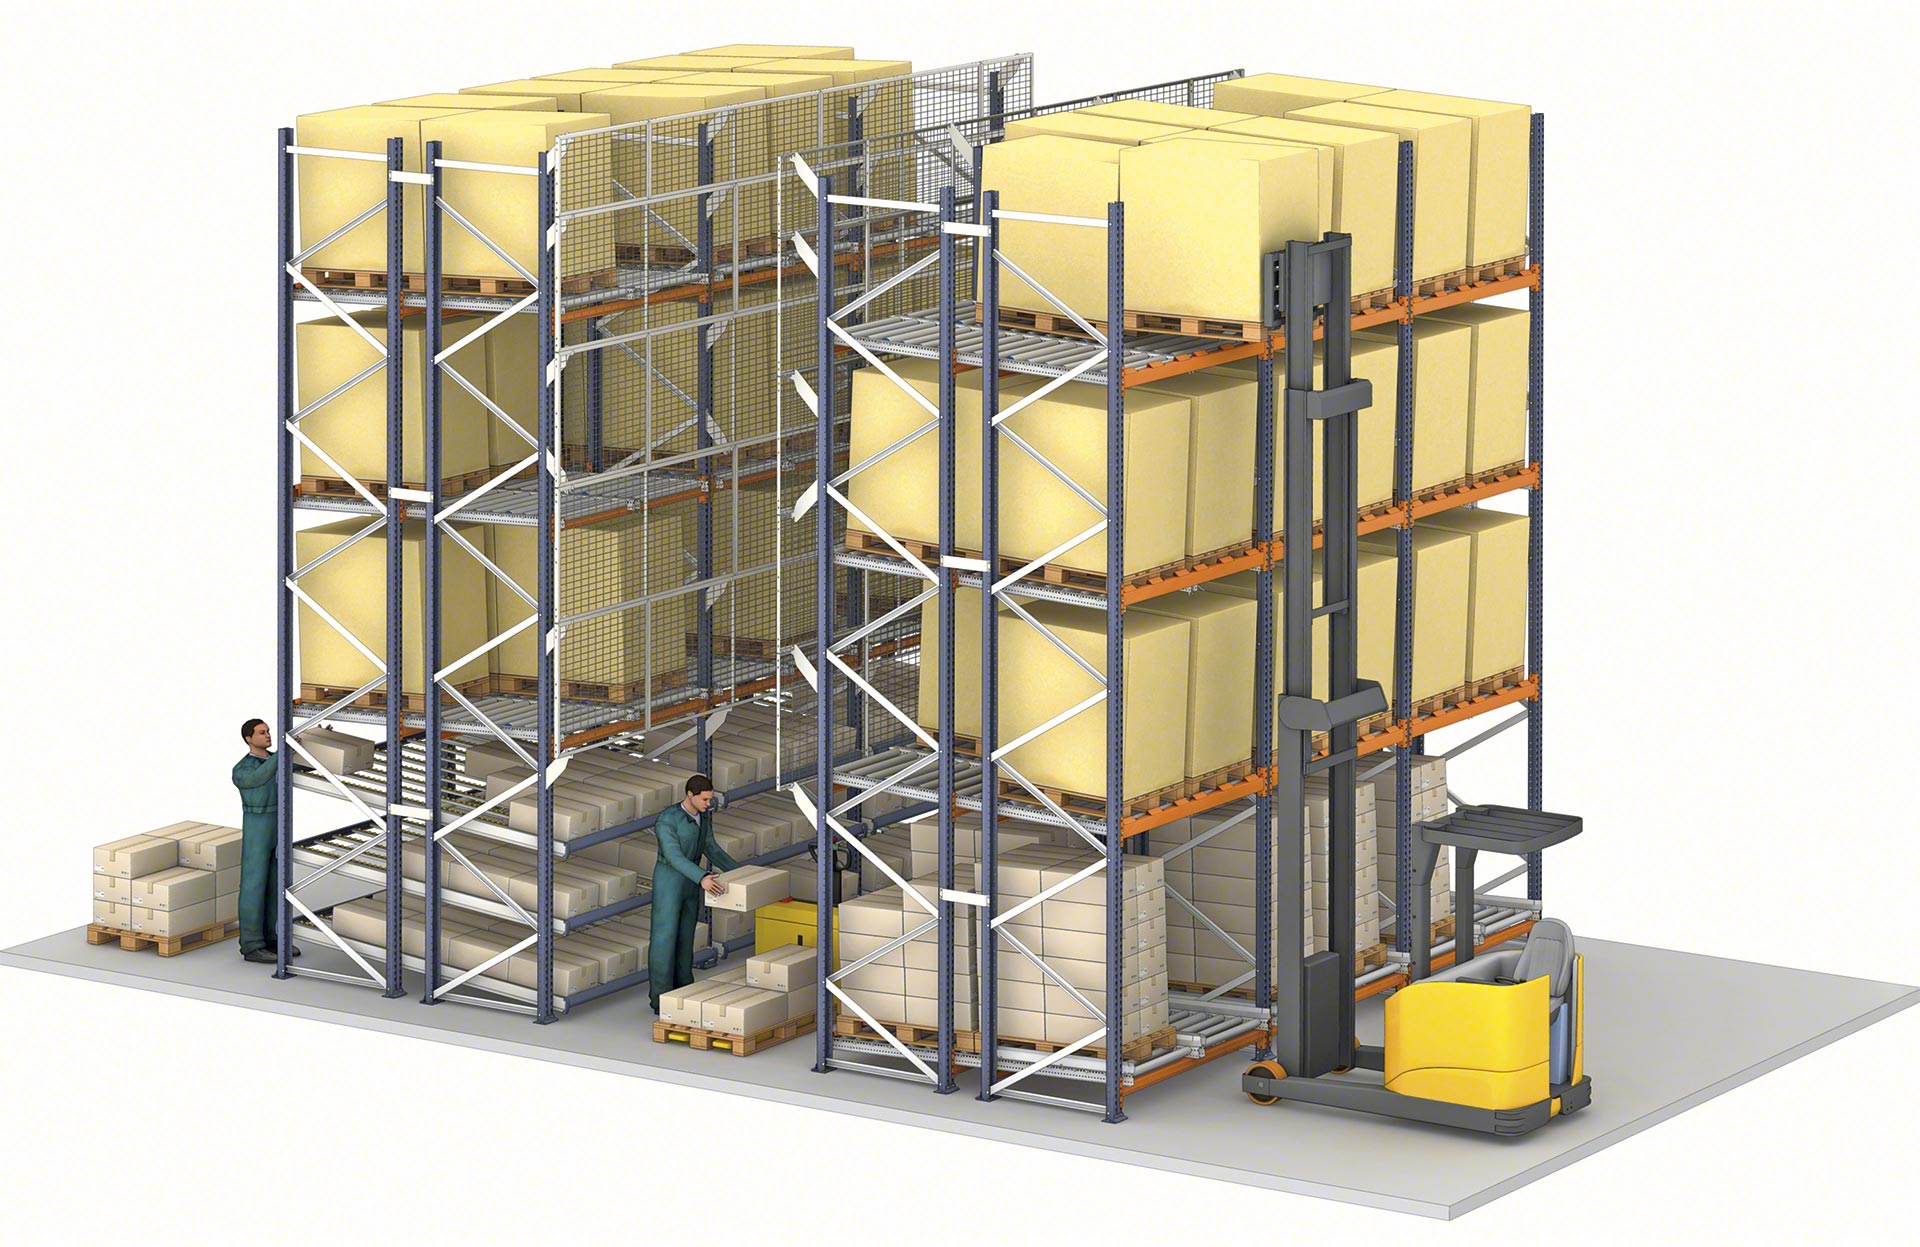 With push-back racking, it is possible to install levels of live pallet racking or carton live storage